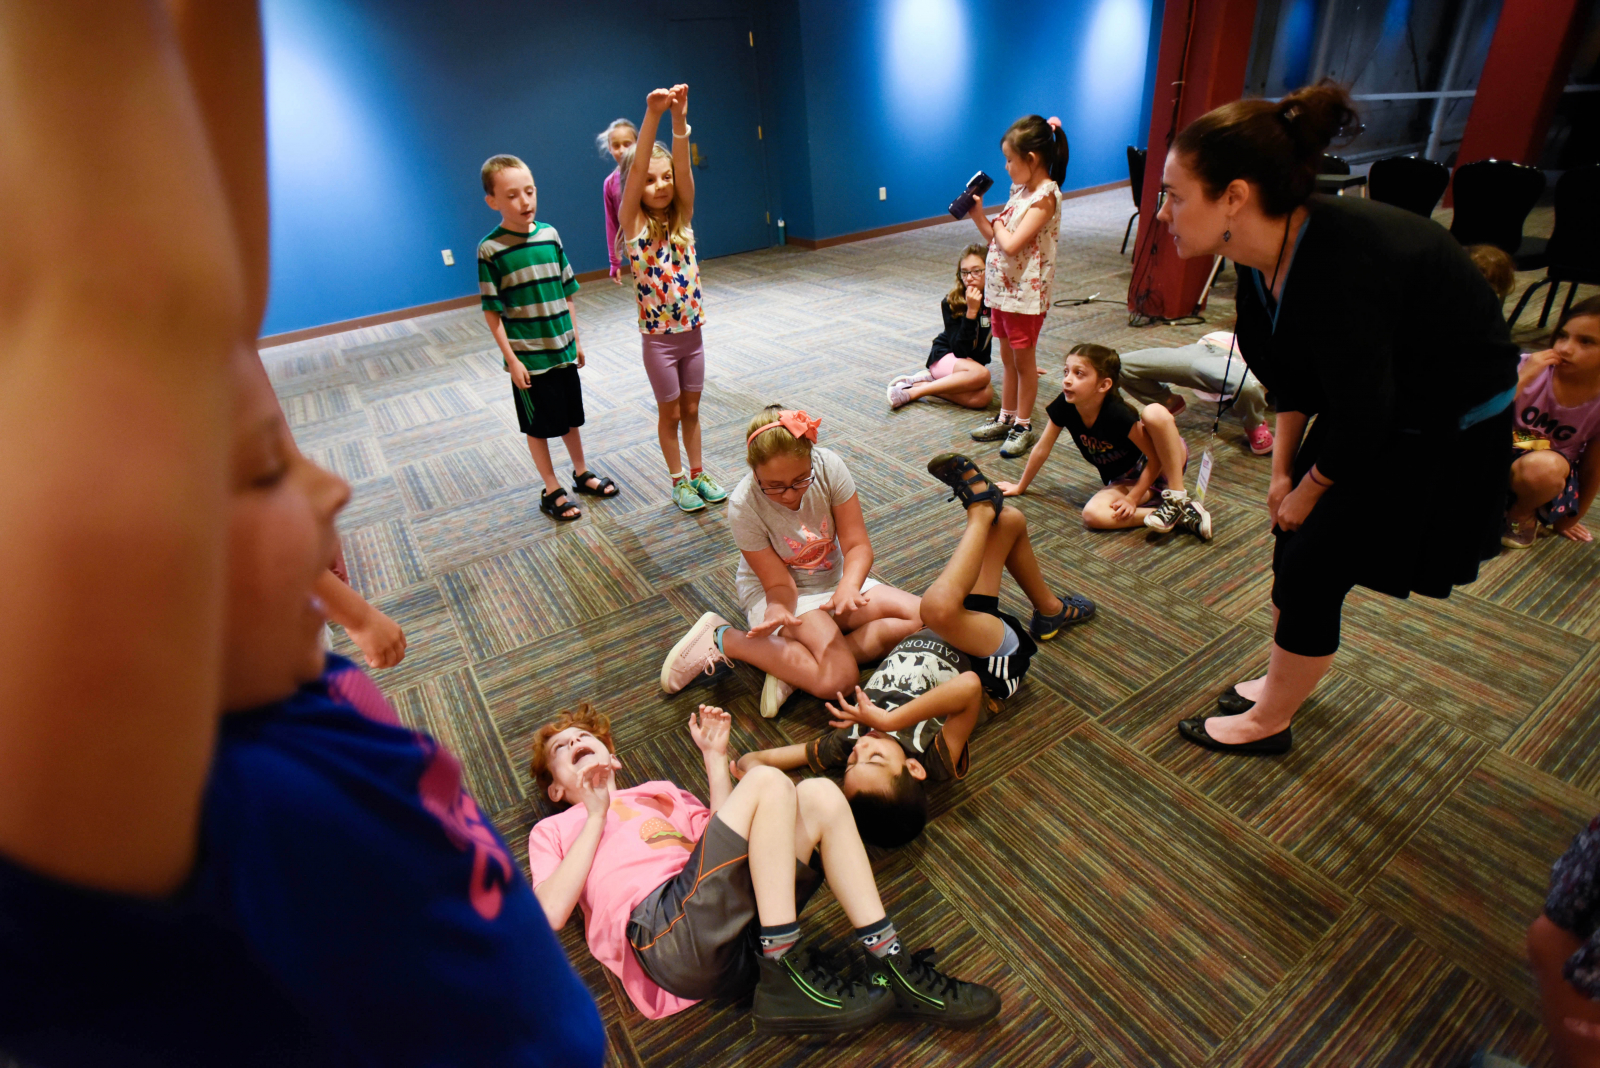 Kids create scenes for "The Three Little Pigs" during Acting Out, part of the School of the Performing Arts Summer Program at Proctors Tuesday, July 11, 2017.